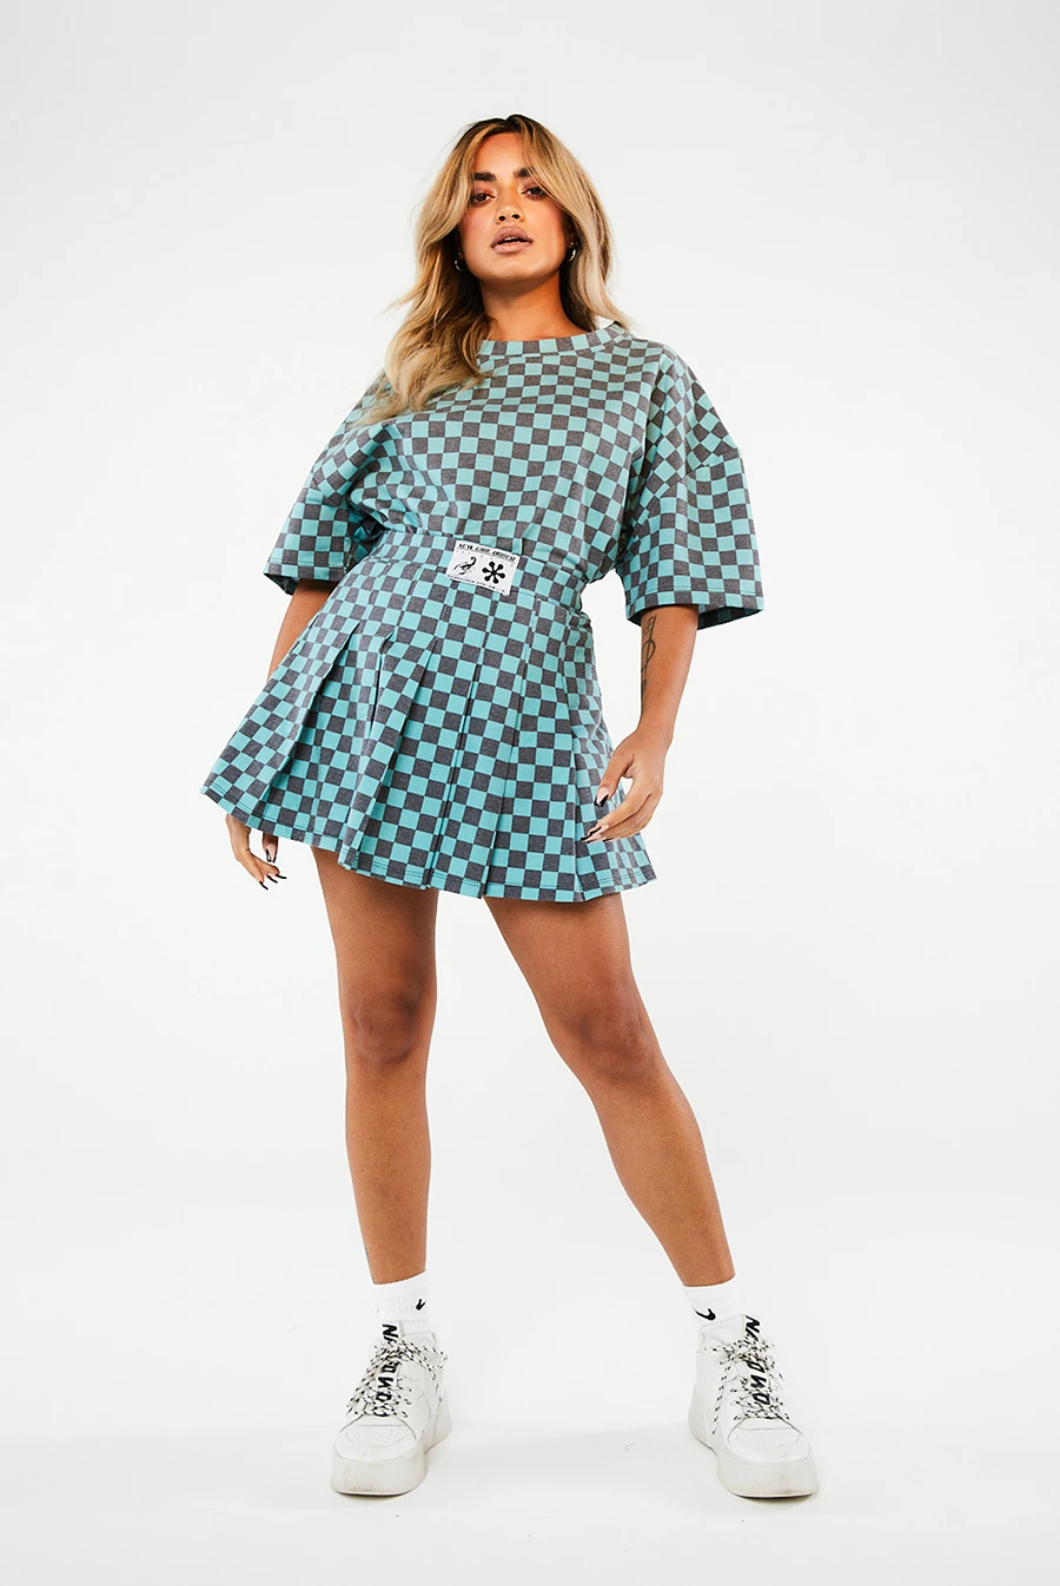 CHECKERBOARD TENNIS SKIRT - TEAL - EXCLUSIVE Skirts from NGO - Just €21! SHOP NOW AT IAMINHATELOVE BOTH IN STORE FOR CYPRUS AND ONLINE WORLDWIDE @ IAMINHATELOVE.COM